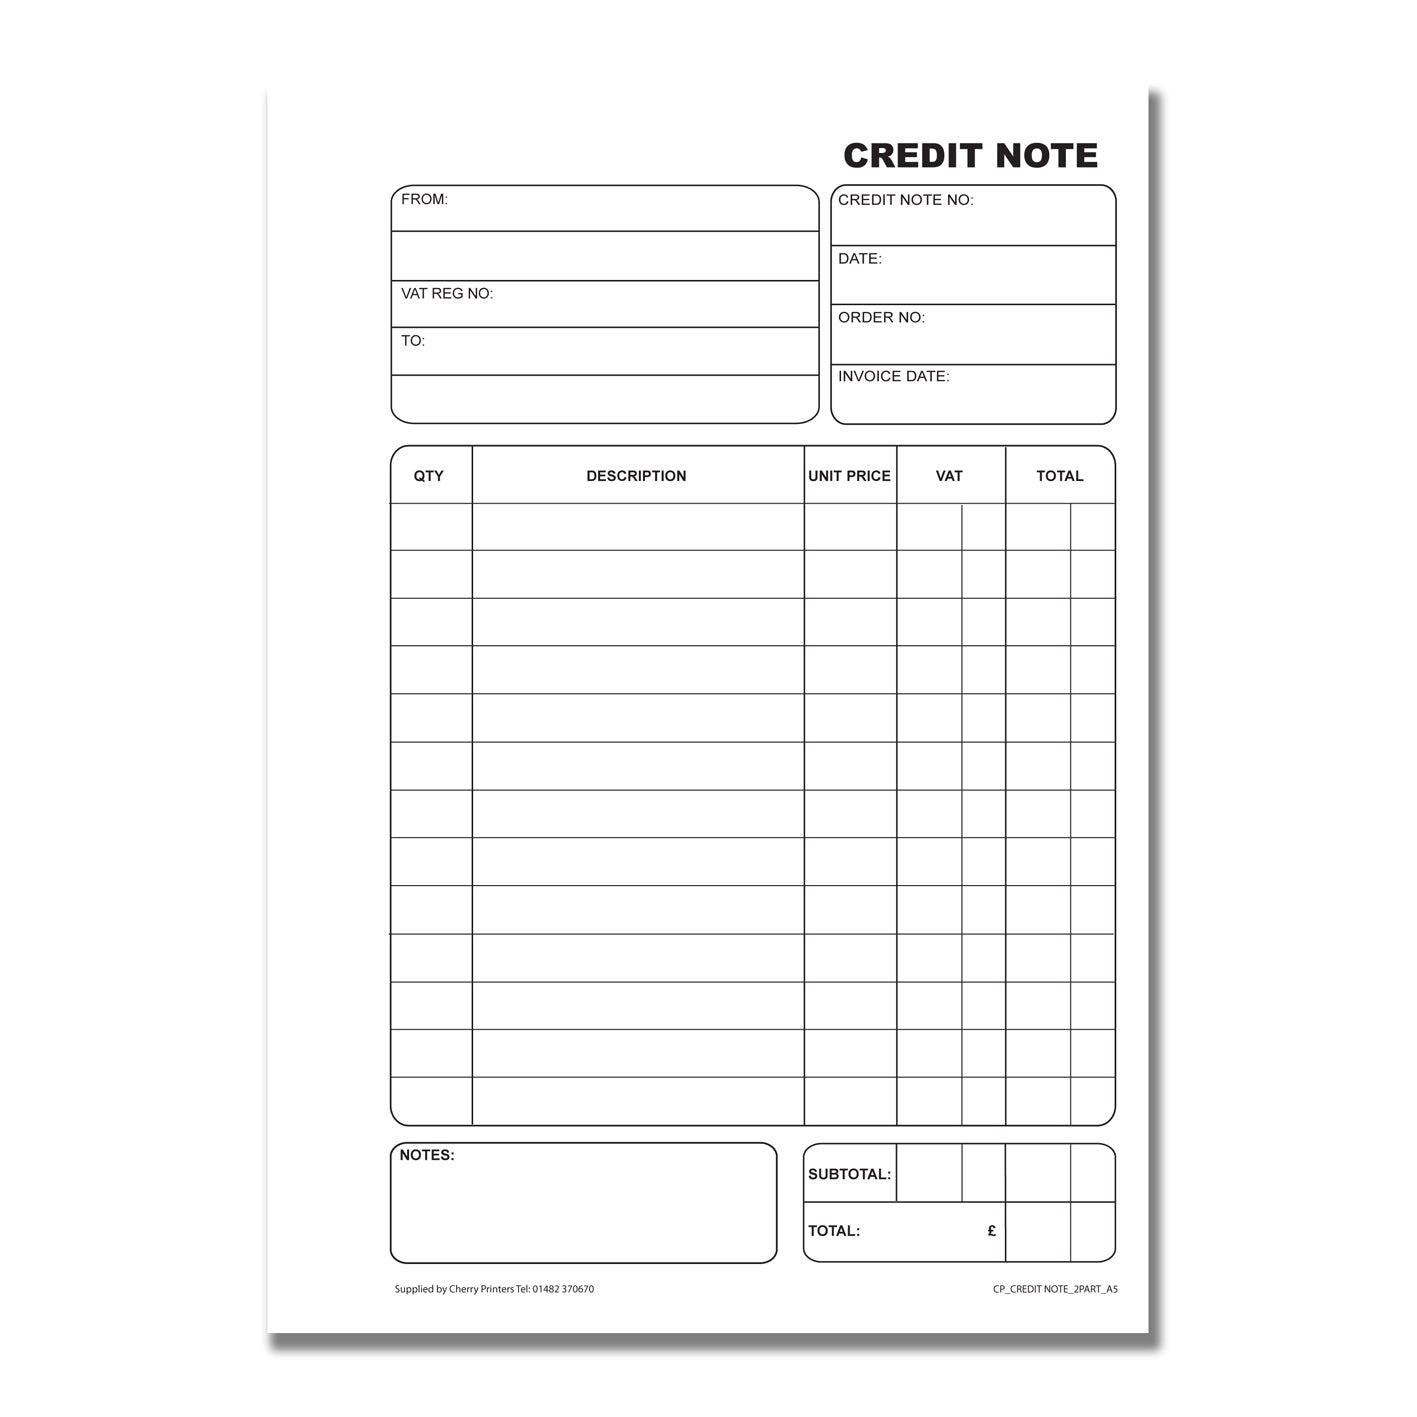 NCR Credit Note  A5 Duplicate